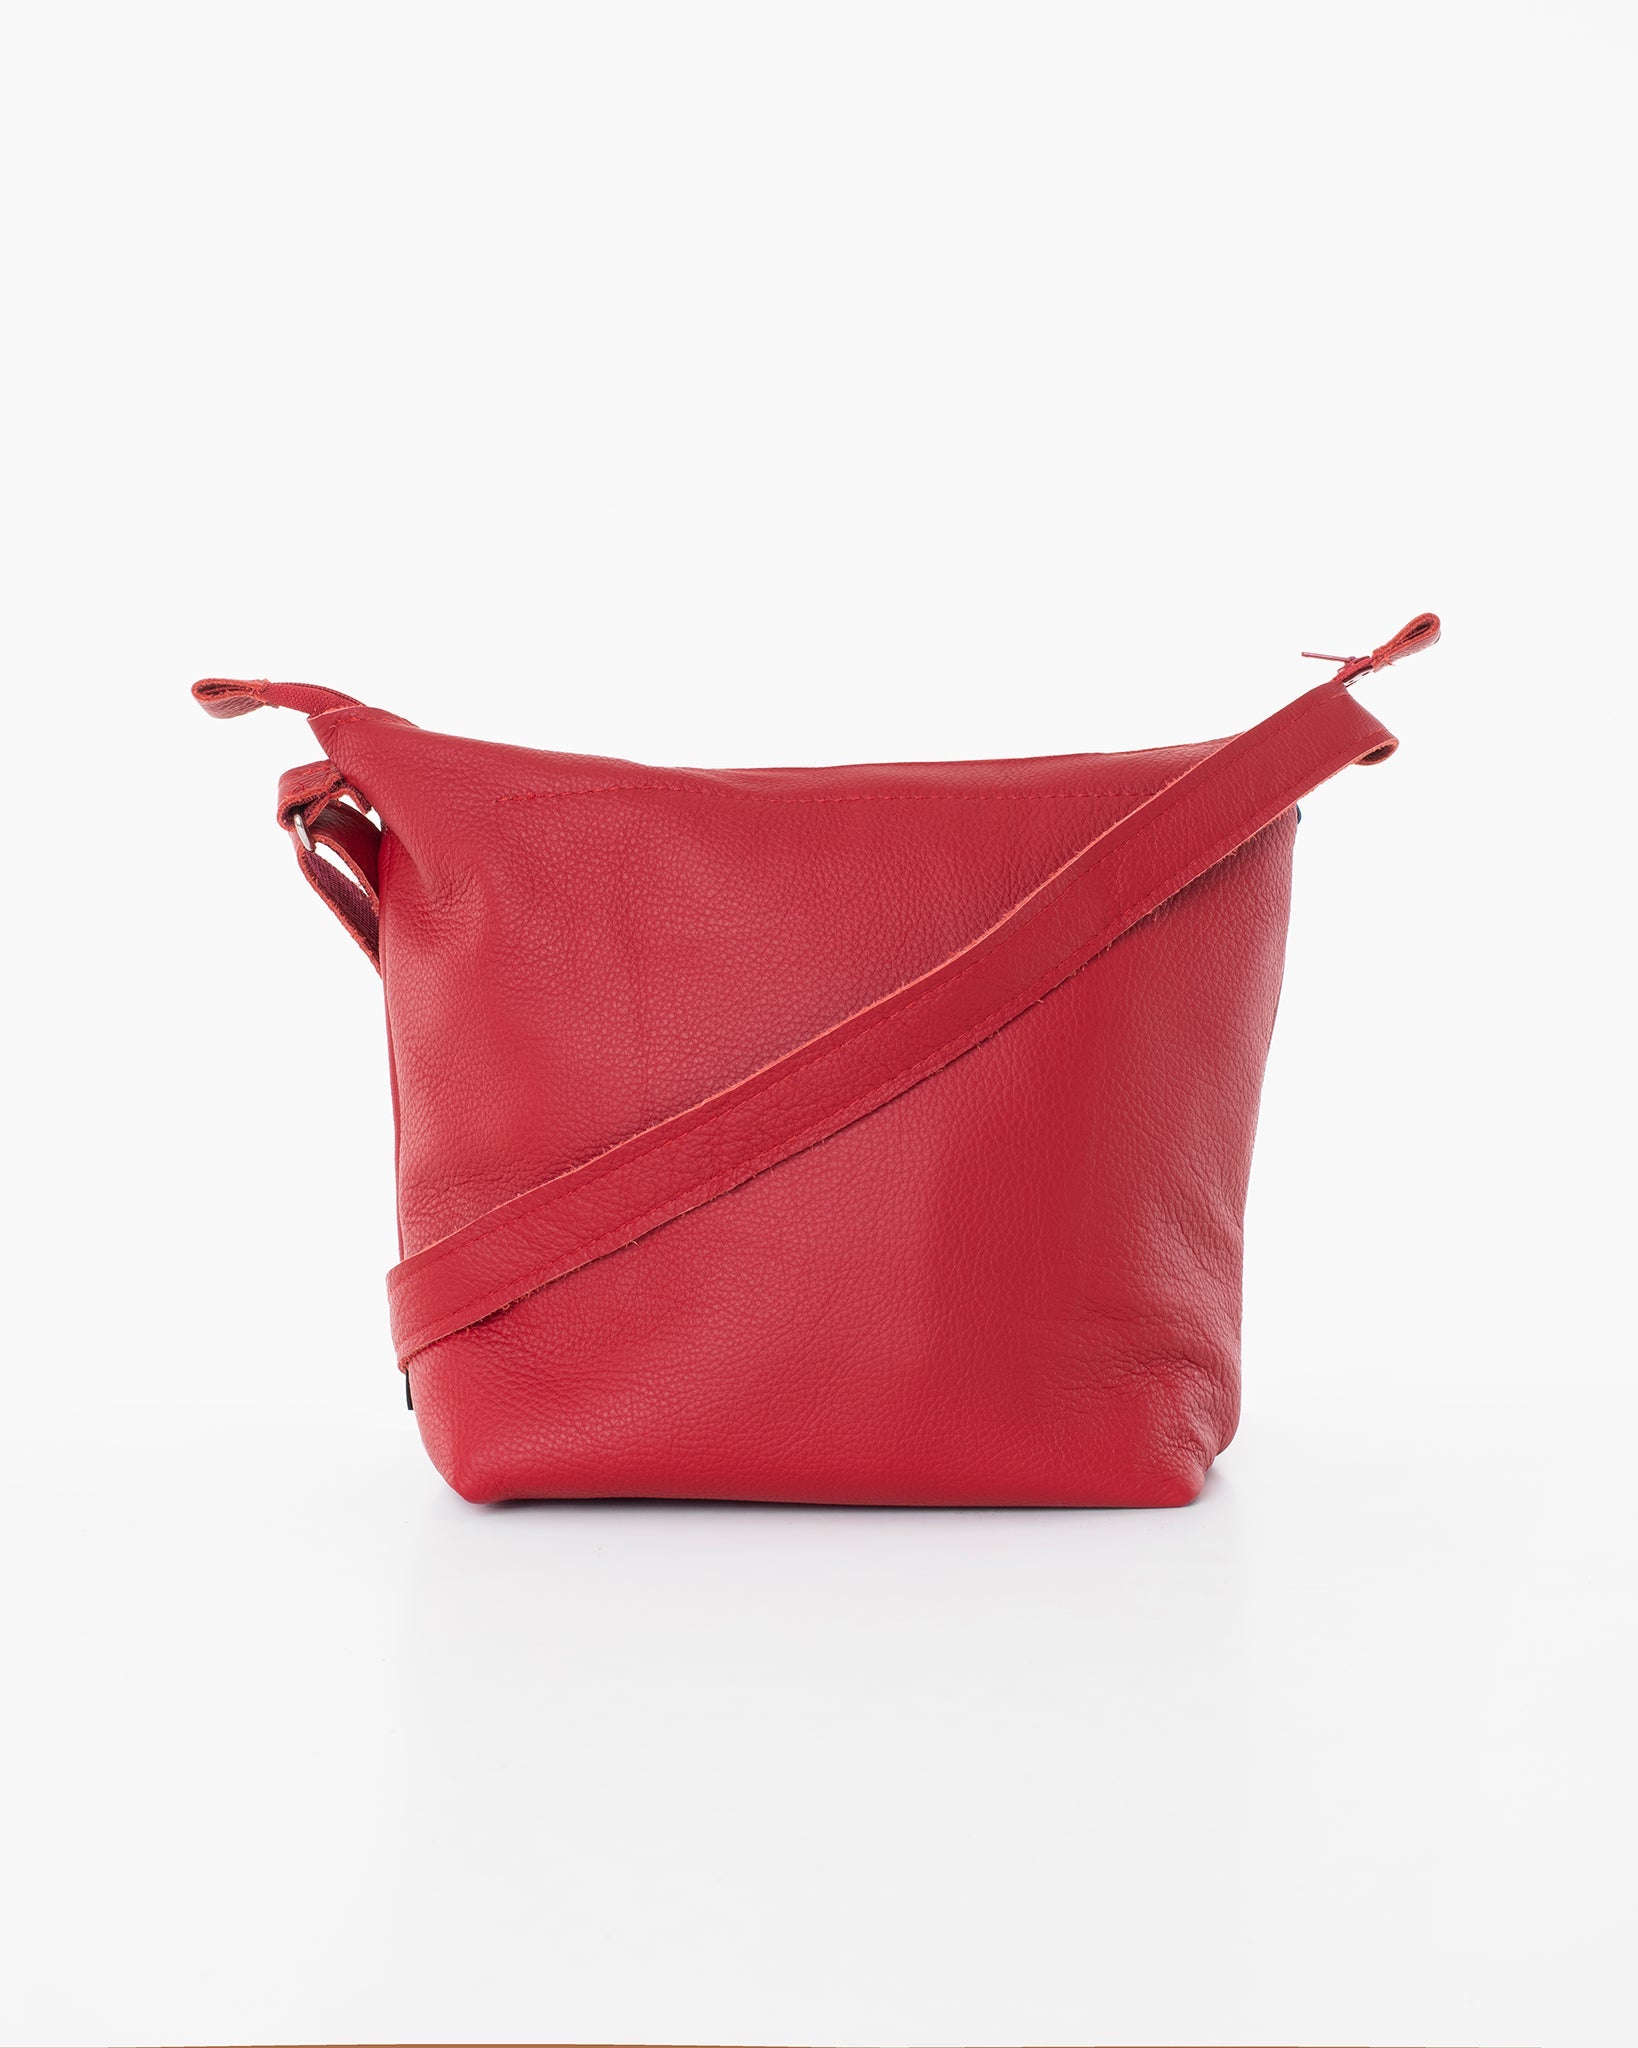 Handmade Suvi XS red leather shoulder bag with zippered compartments, crafted from furniture industry leftovers. Unique design from Estonia.